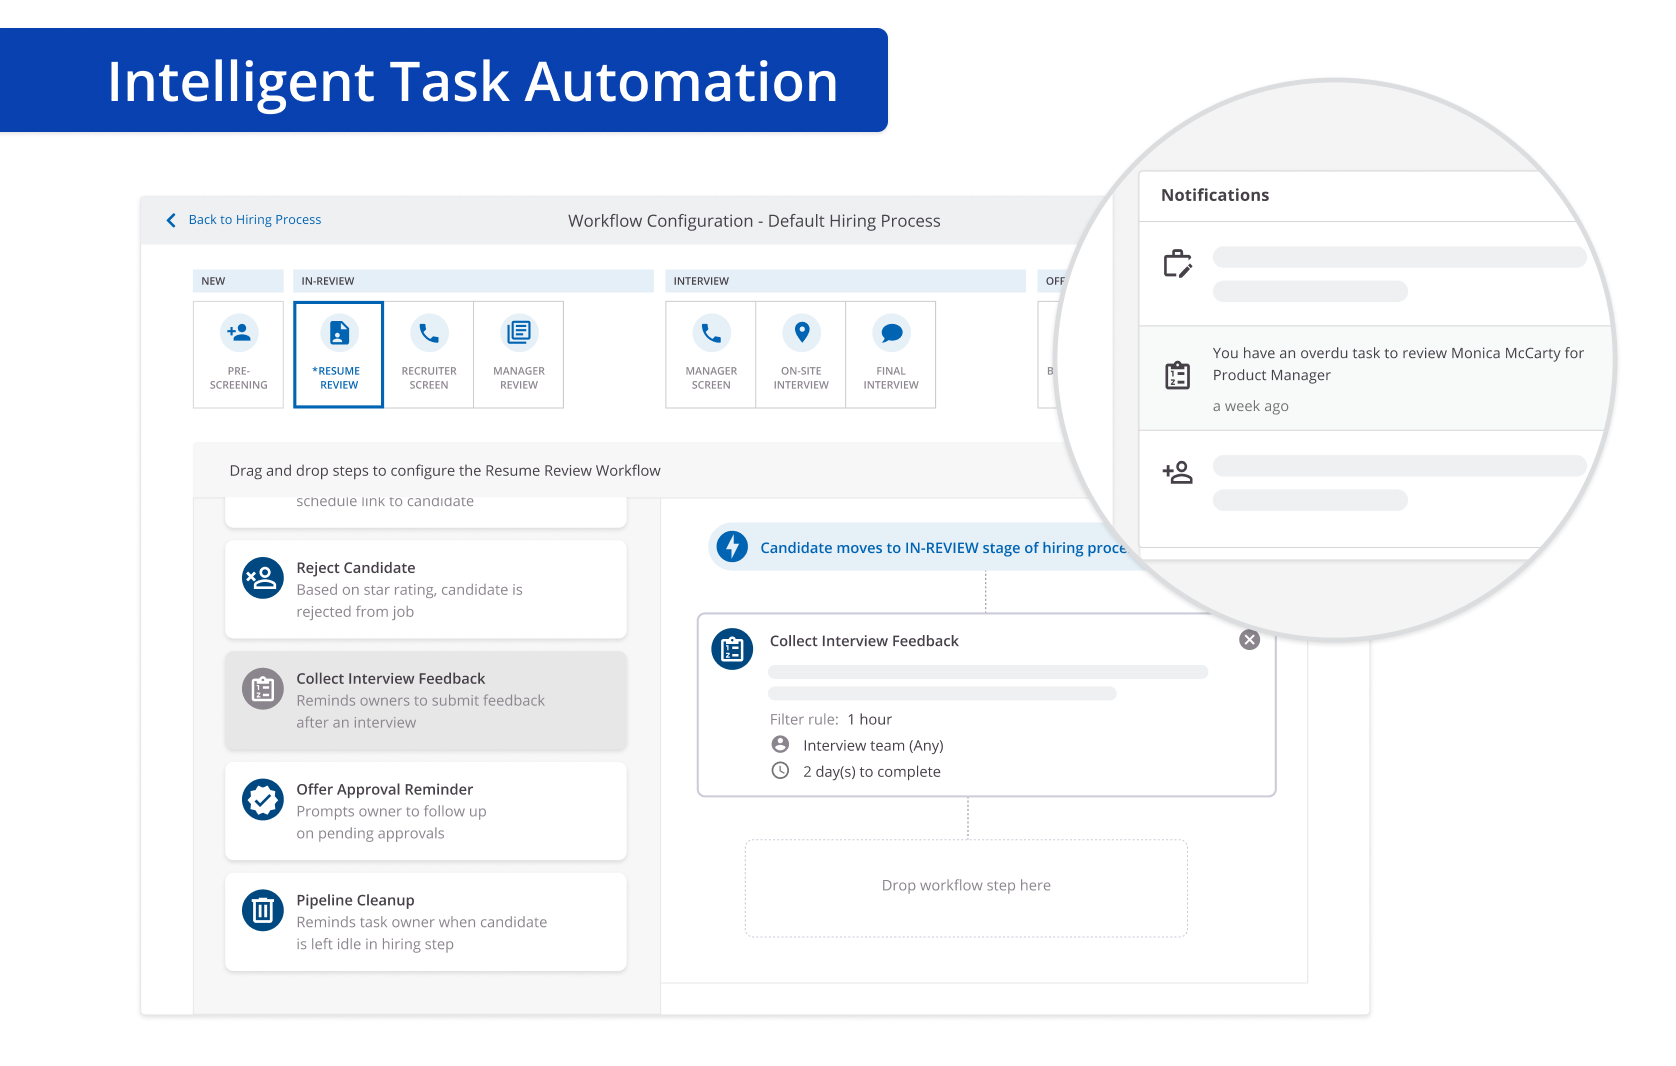 Automation across the end to end recruitment life cycle. Free up hiring teams to focus on making great hires and simultaneously deliver world class candidate experience by automating routine tasks.